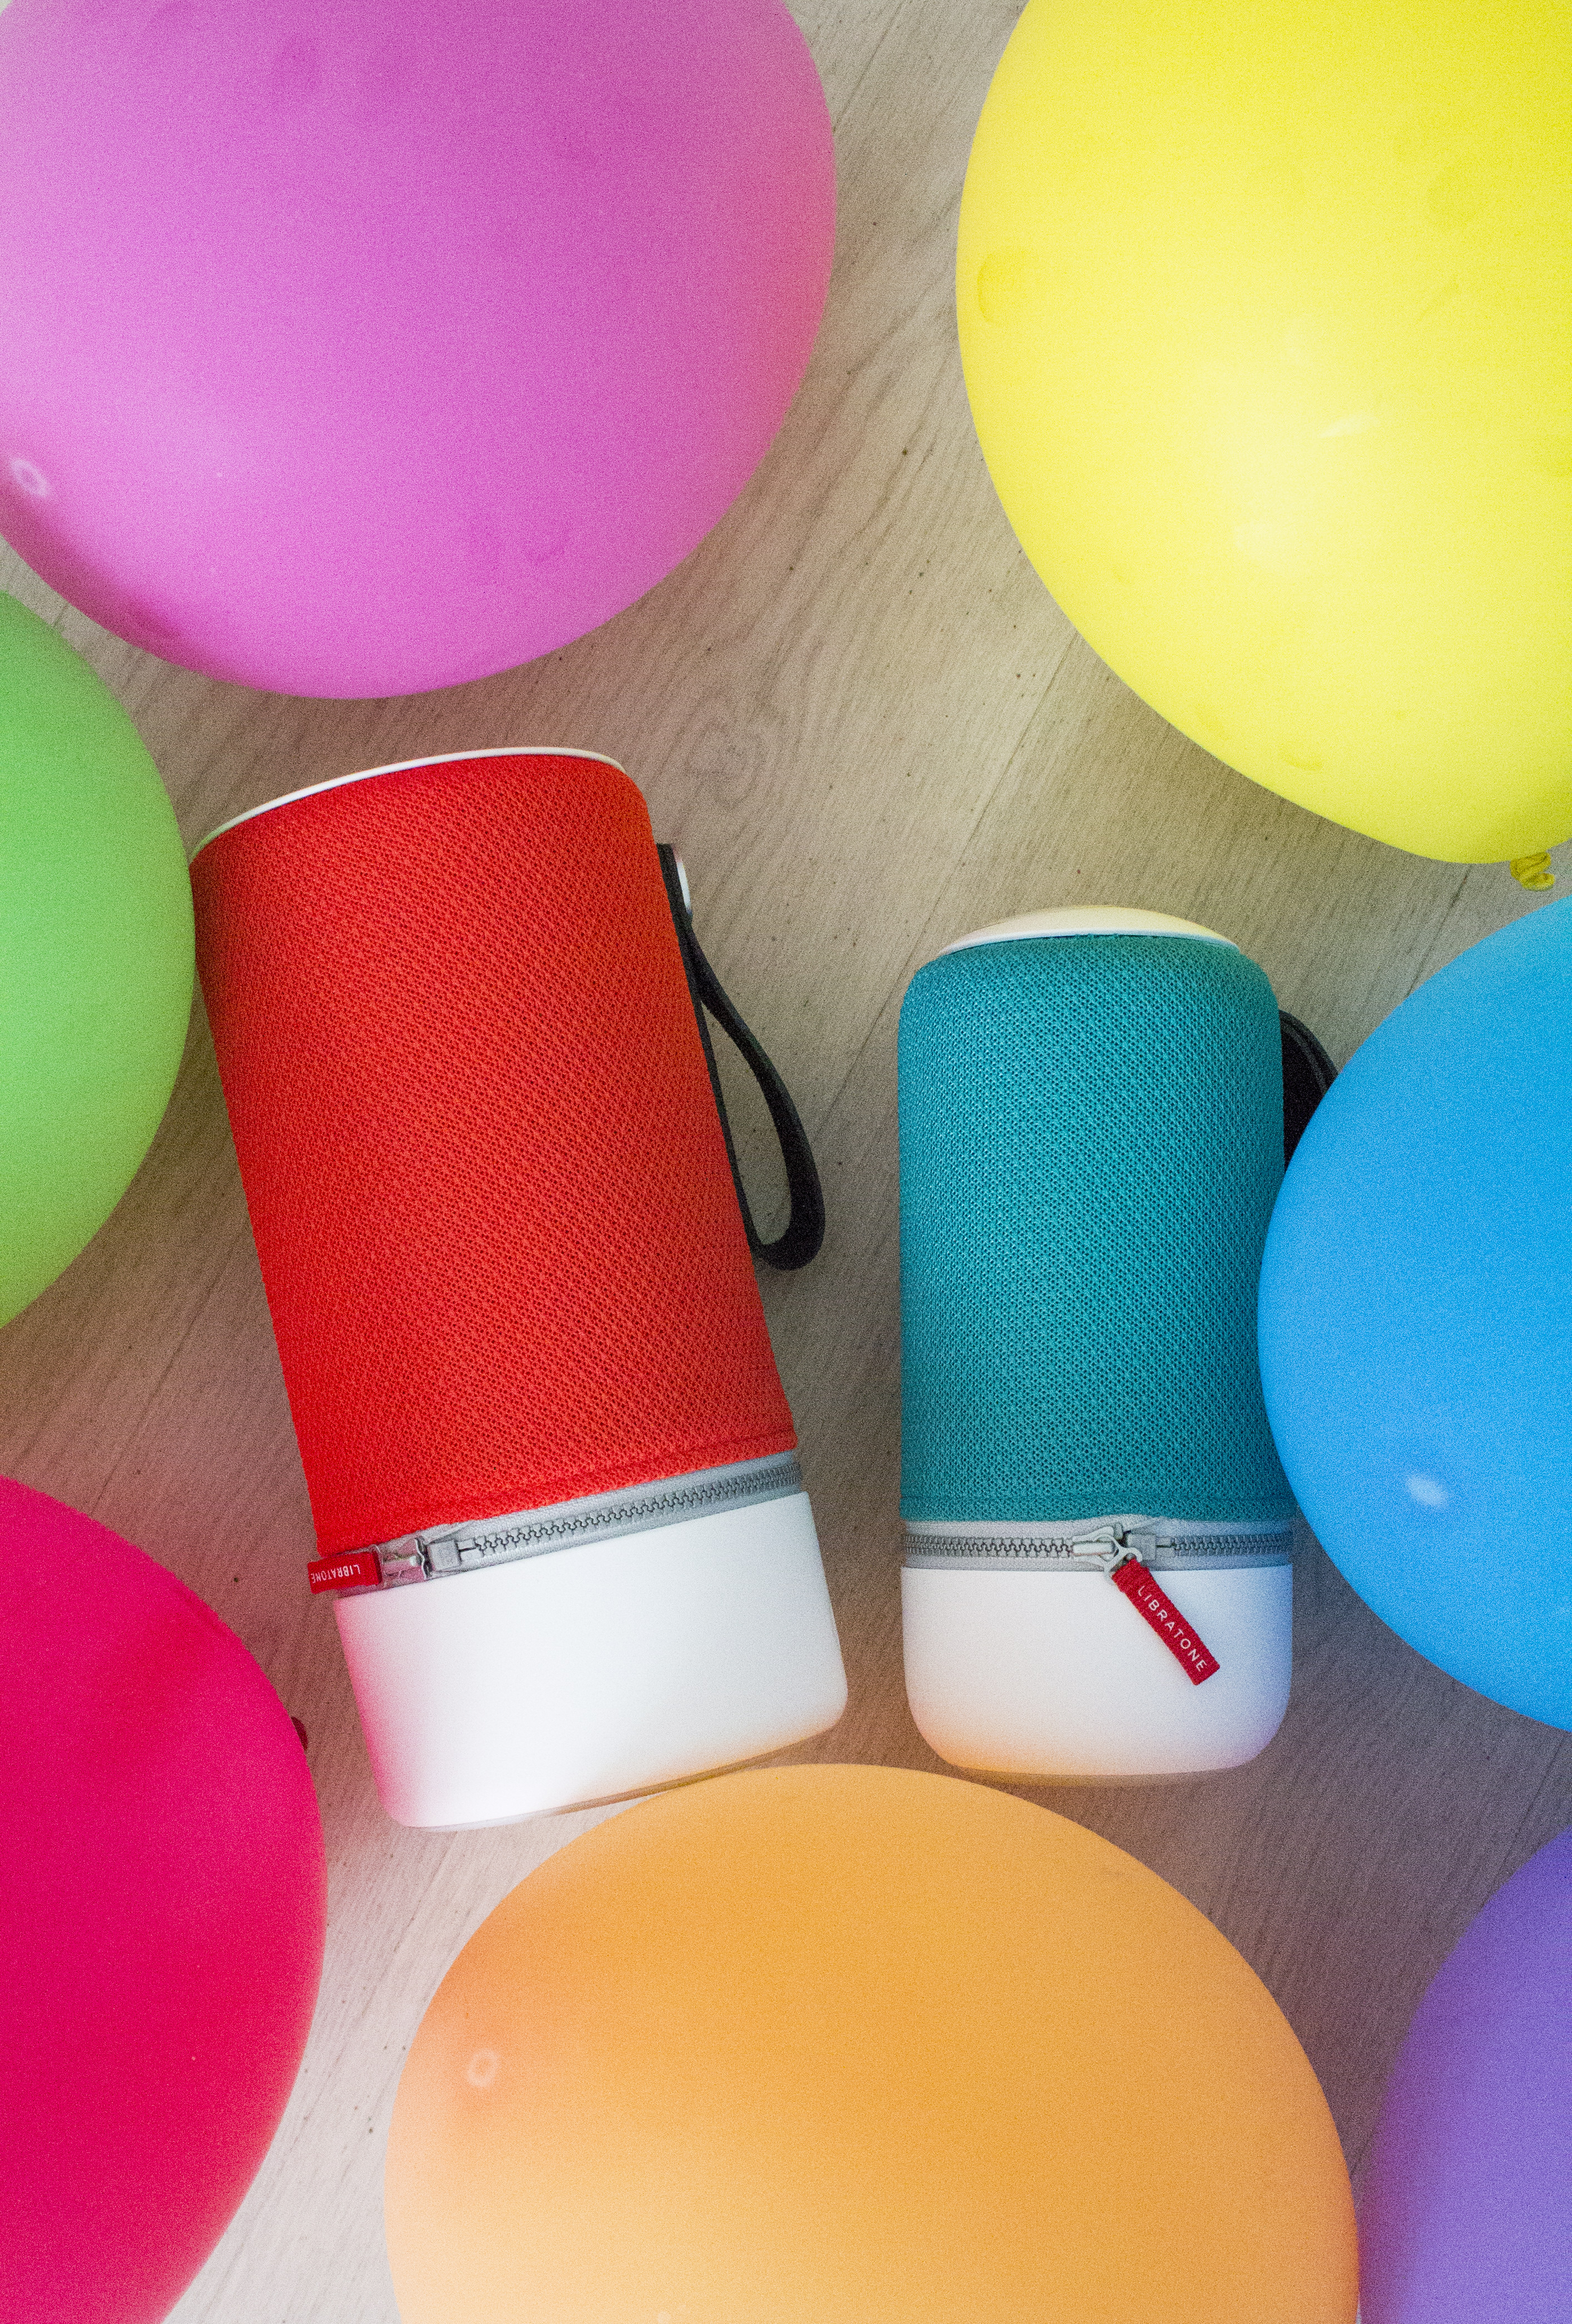 Colourful-Libratone-music-photo-by-Little-Big-Bell